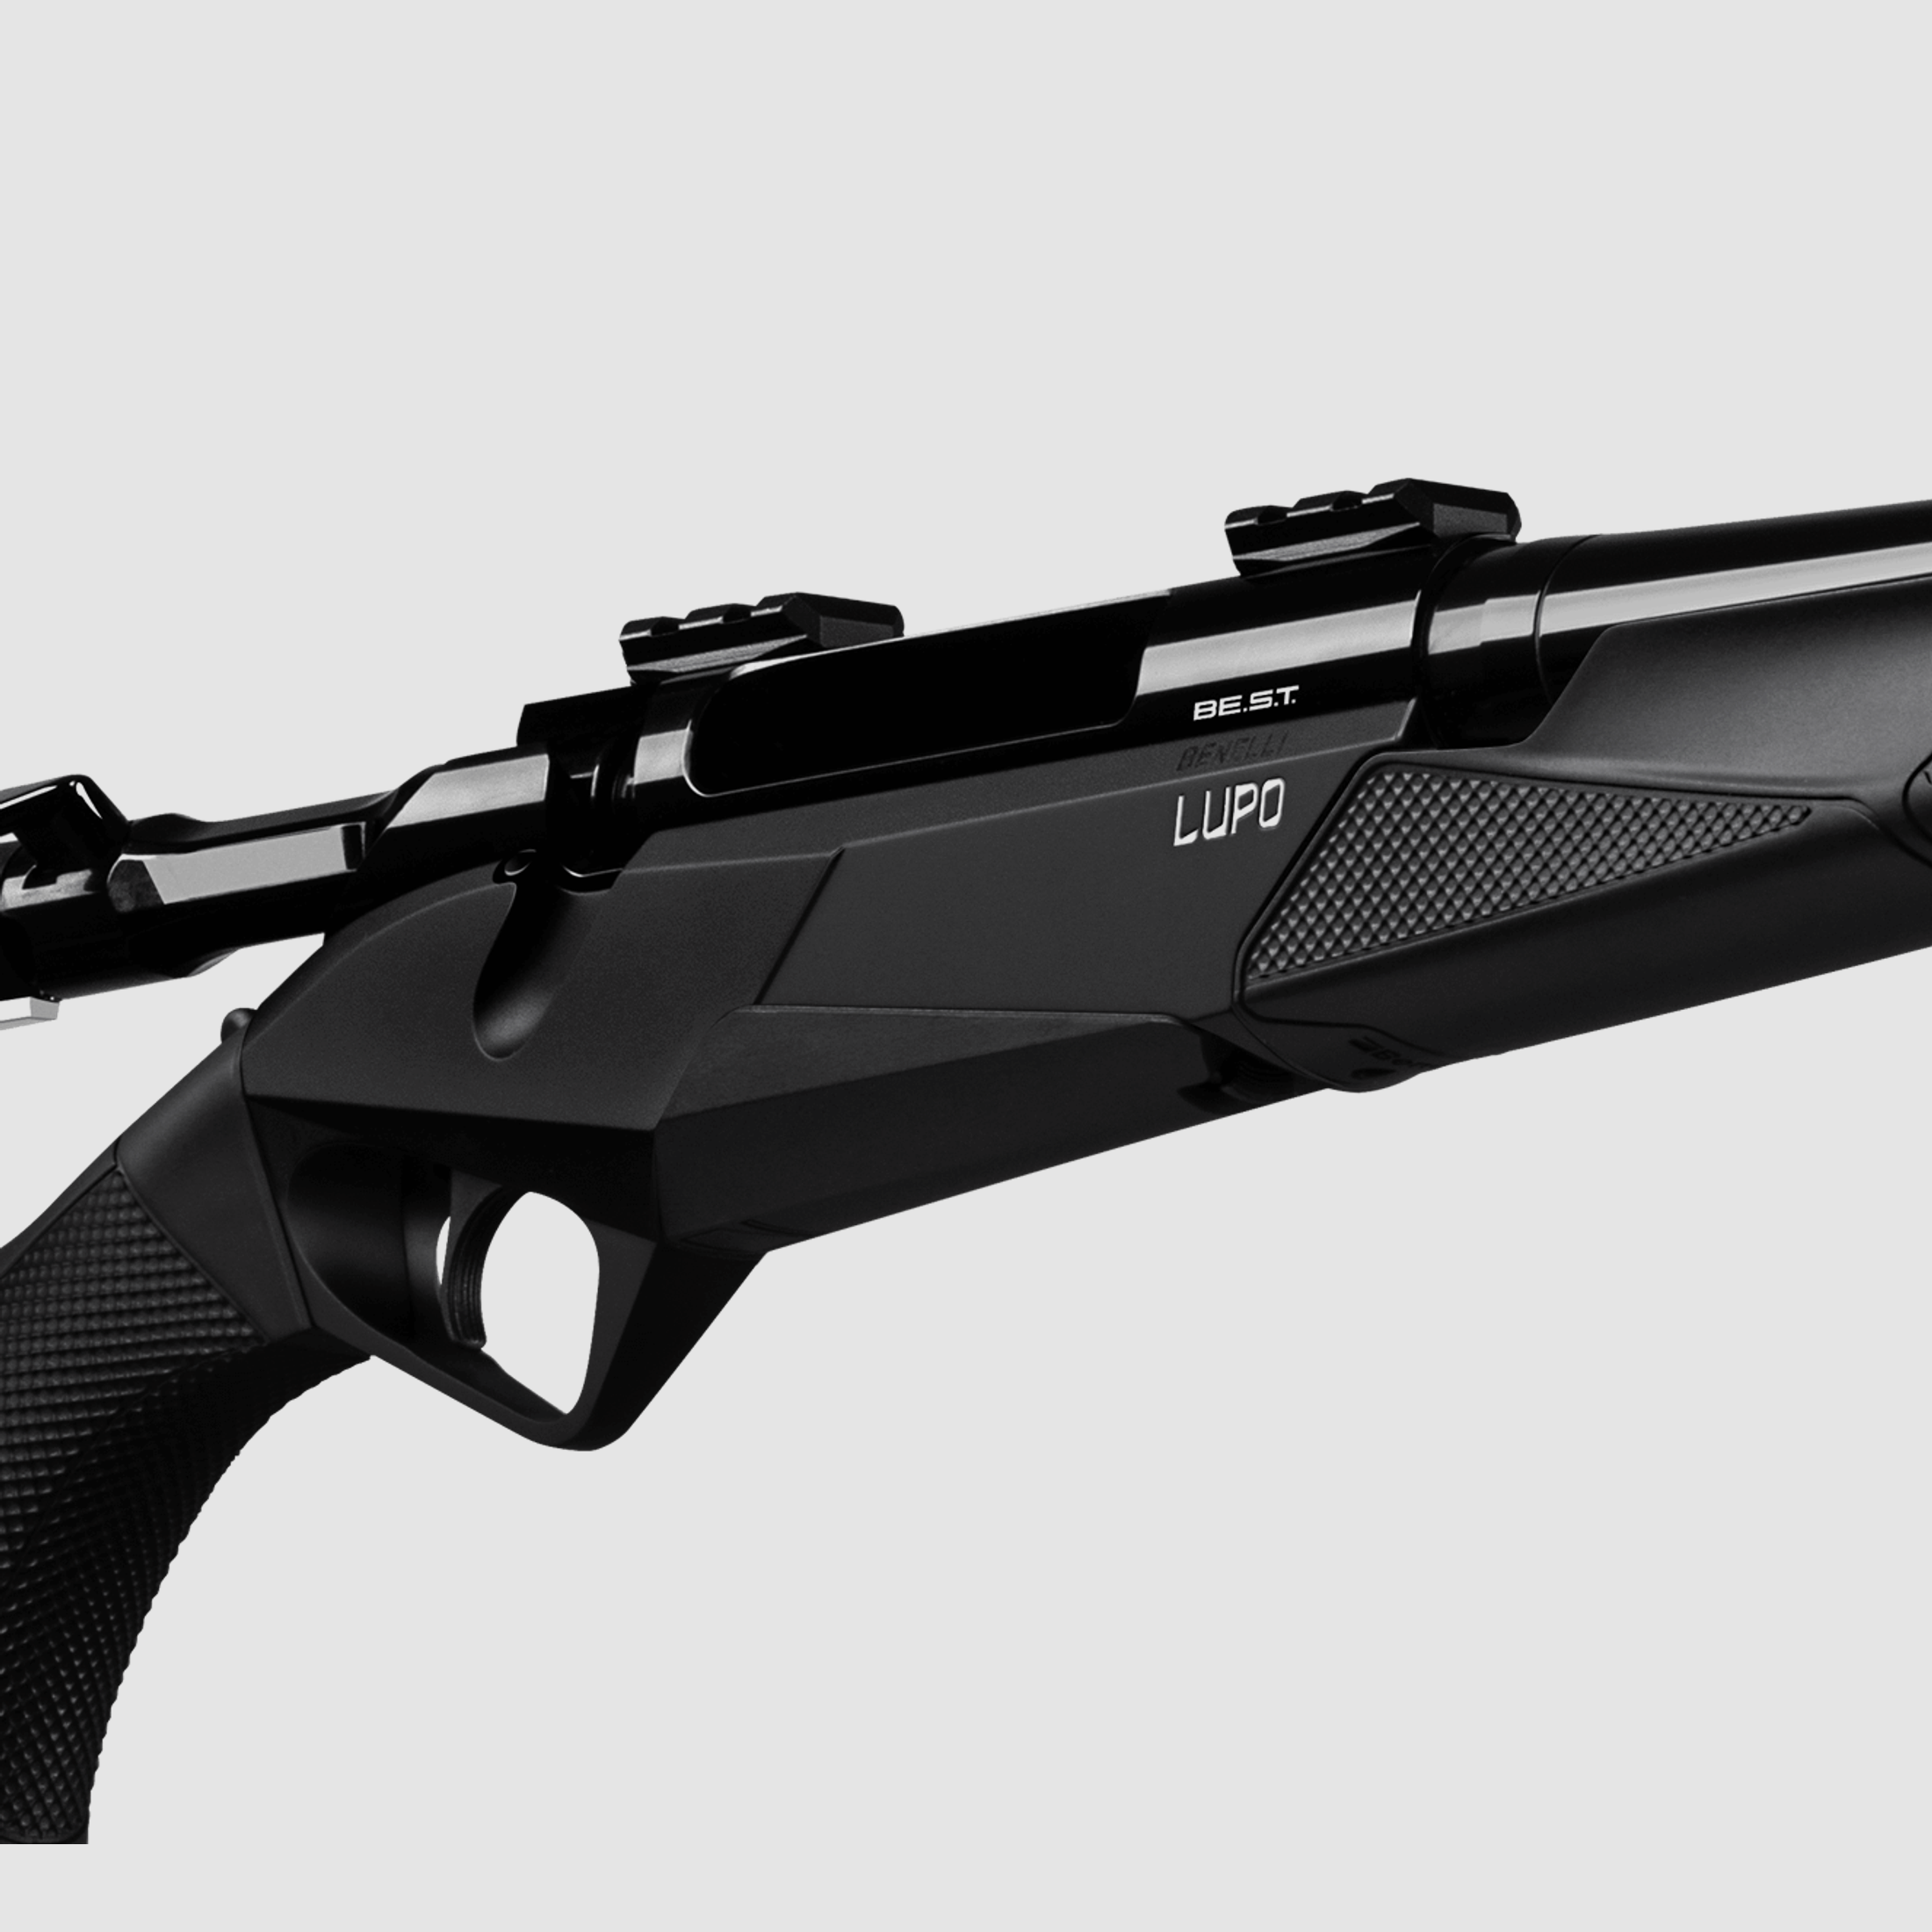 Benelli Lupo Black BE.S.T. Repetierbüchse